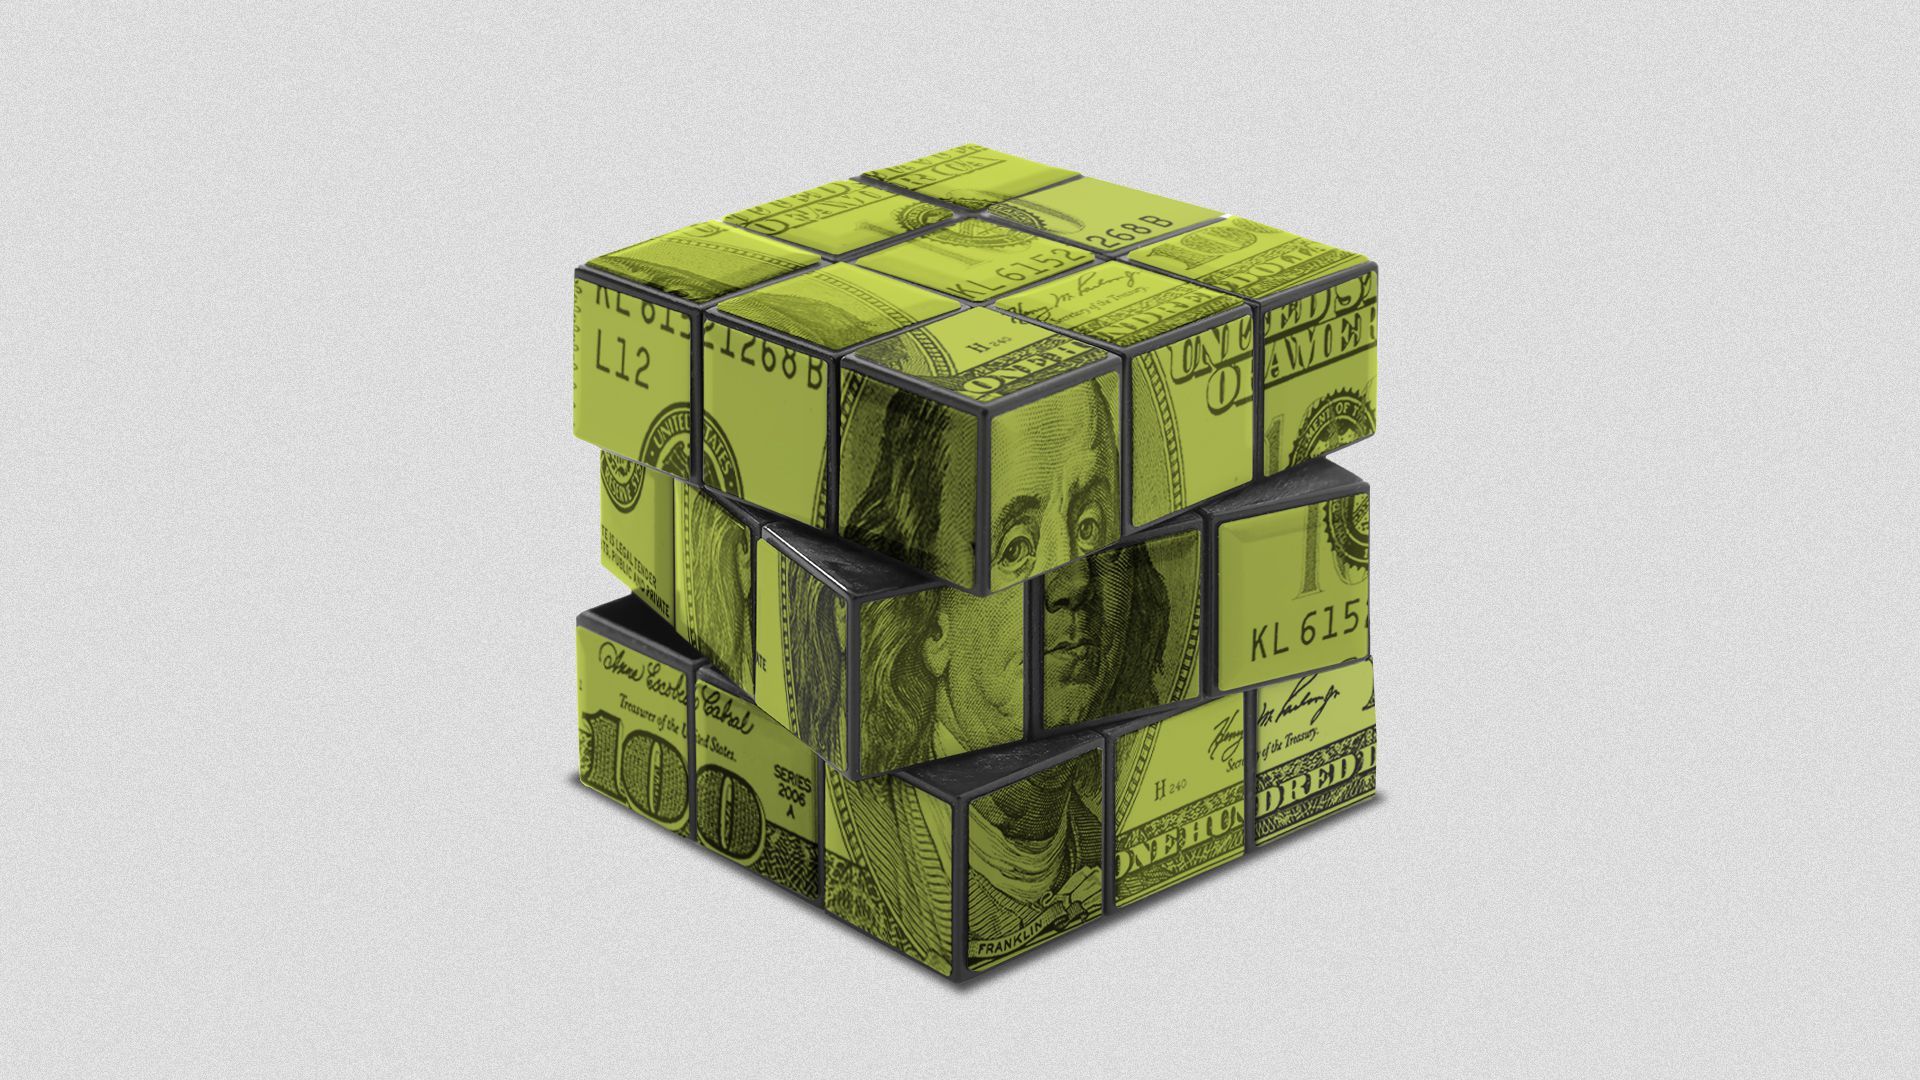 Illustration of a rubix cube made out of dollar bills